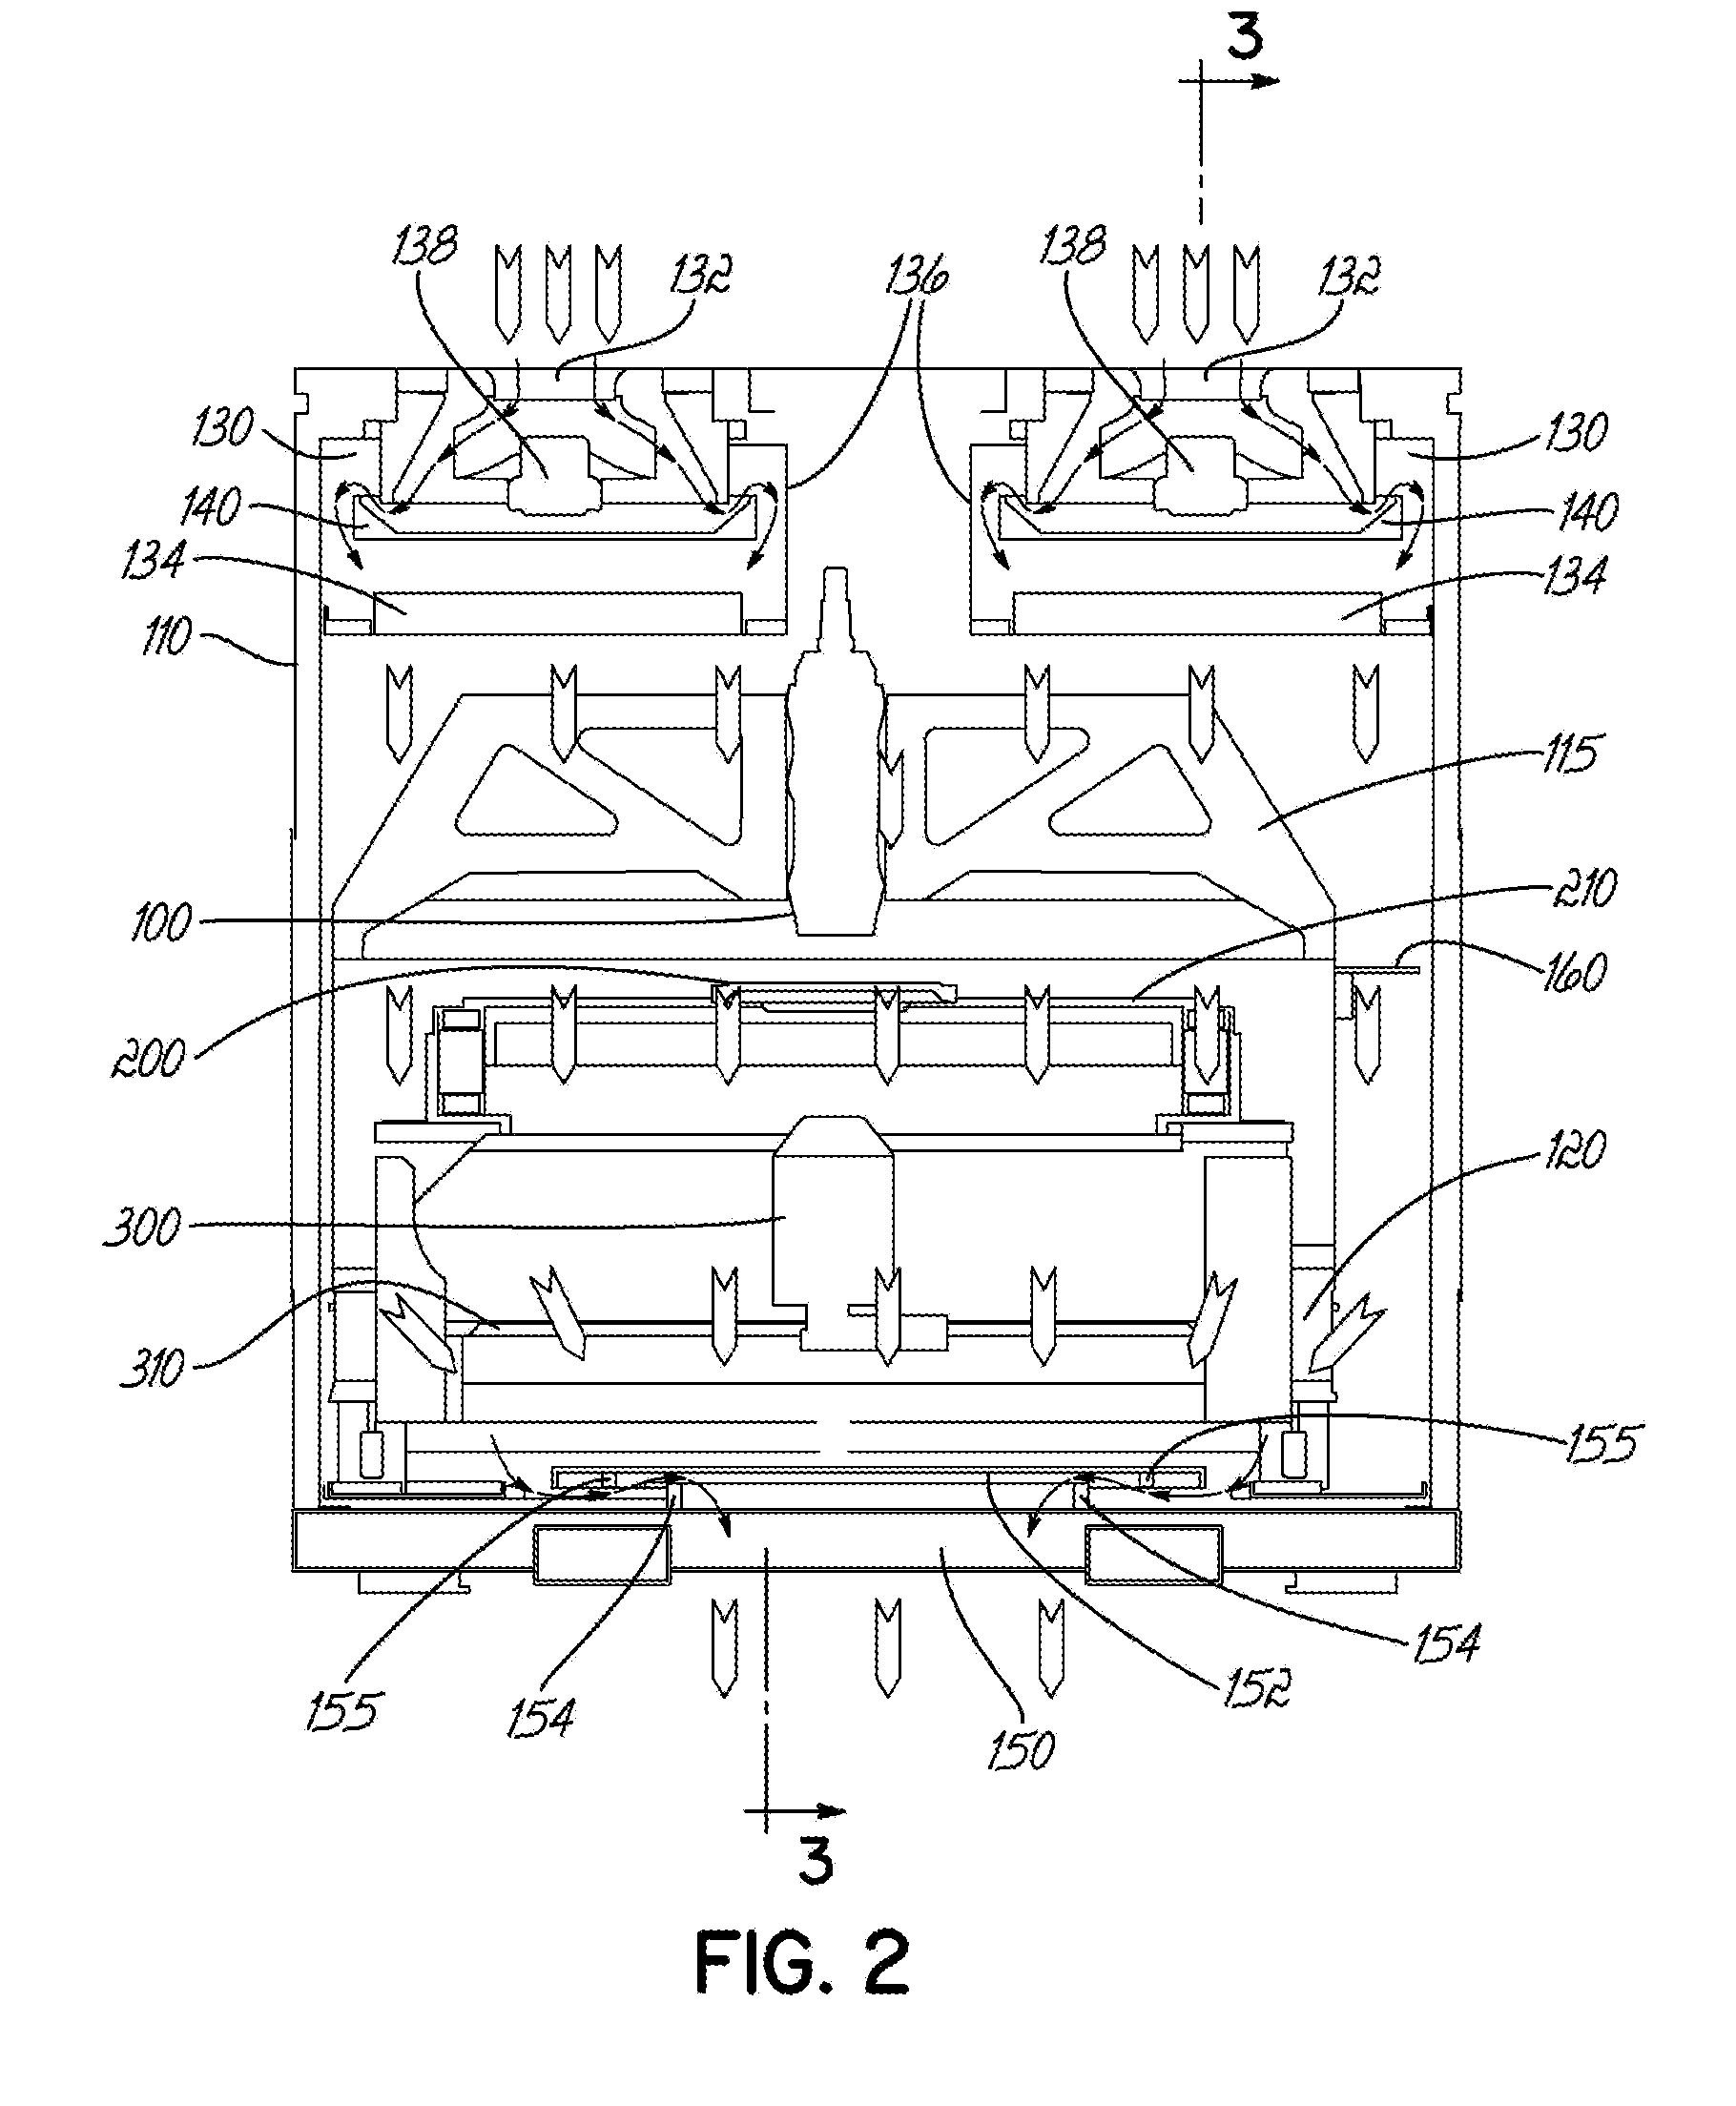 X-ray inspection apparatus for inspecting semiconductor wafers